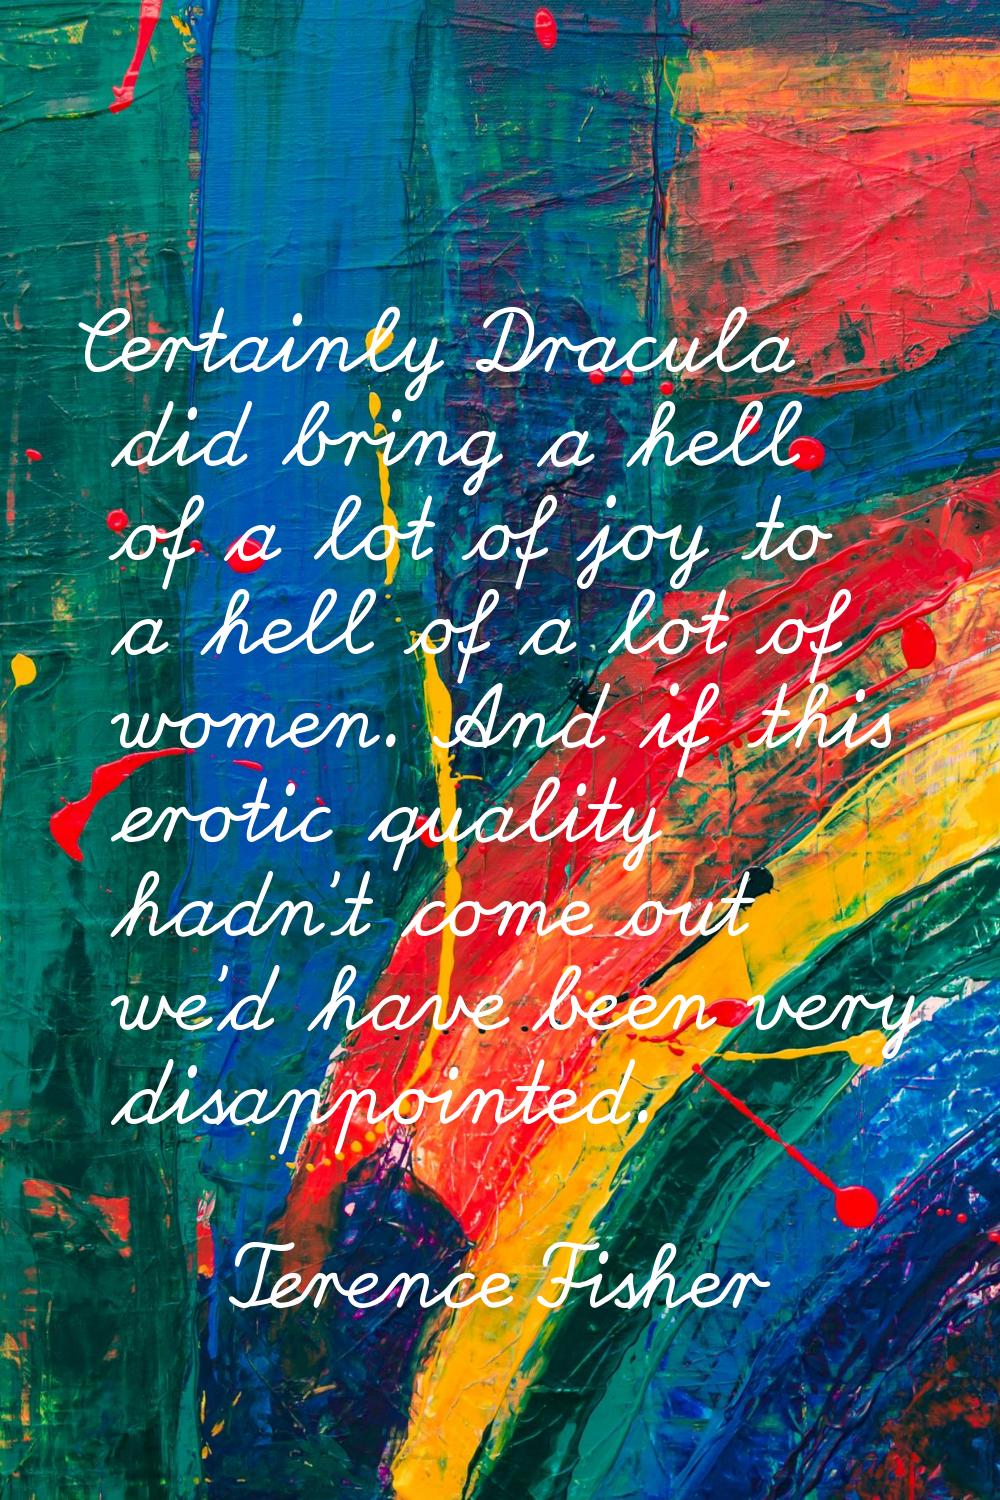 Certainly Dracula did bring a hell of a lot of joy to a hell of a lot of women. And if this erotic 